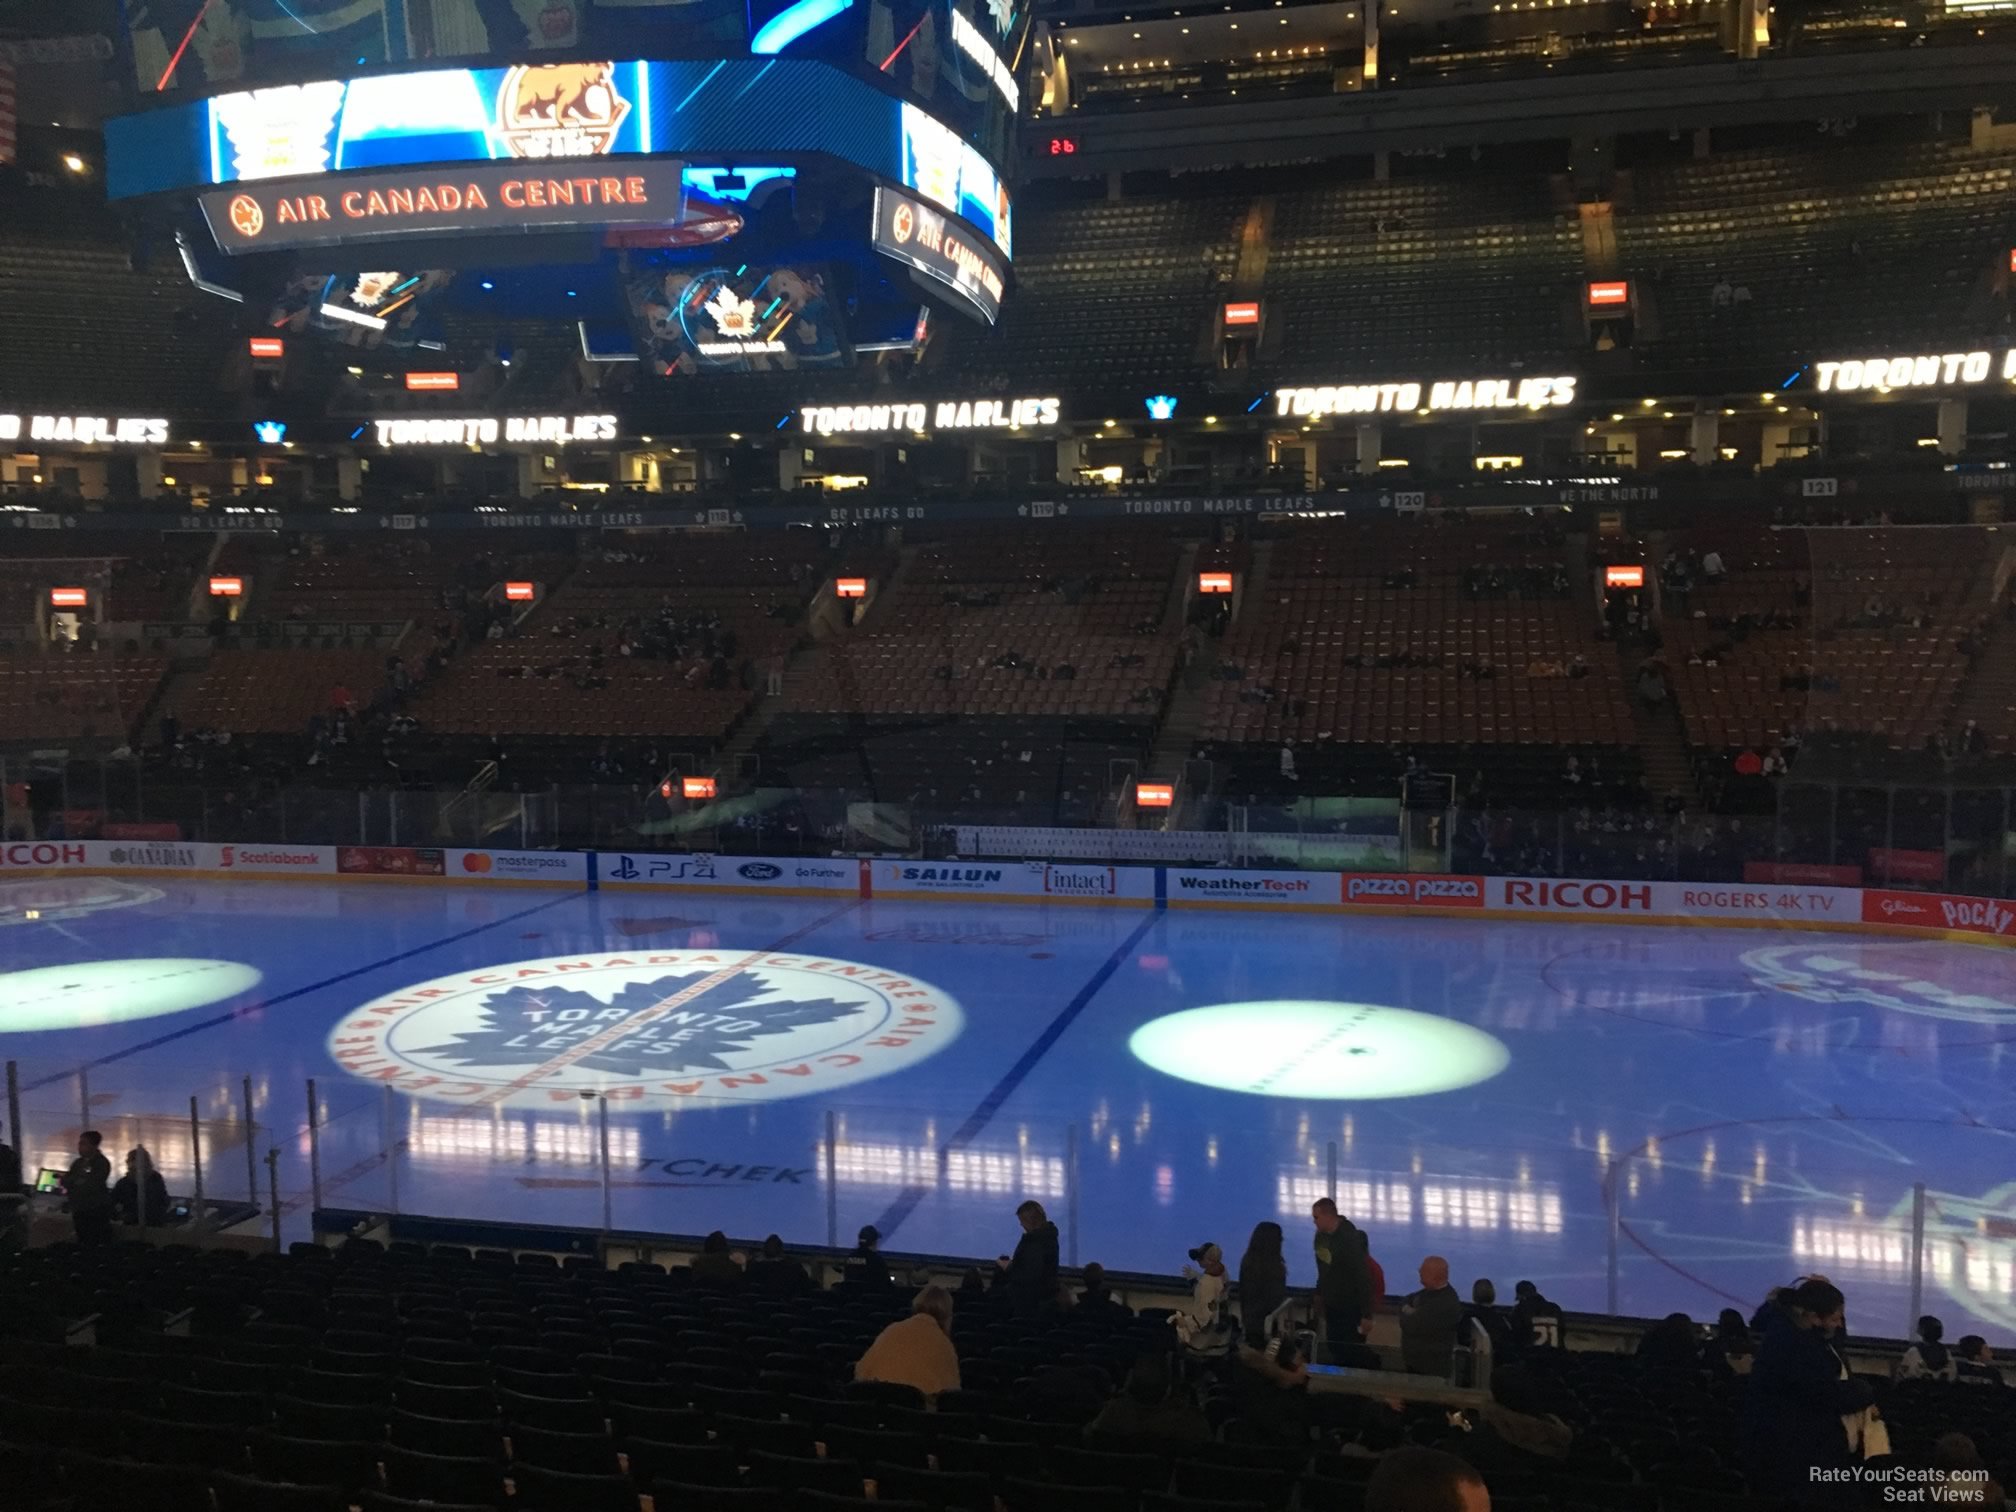 Scotiabank Arena Toronto Maple Leafs Seating Chart